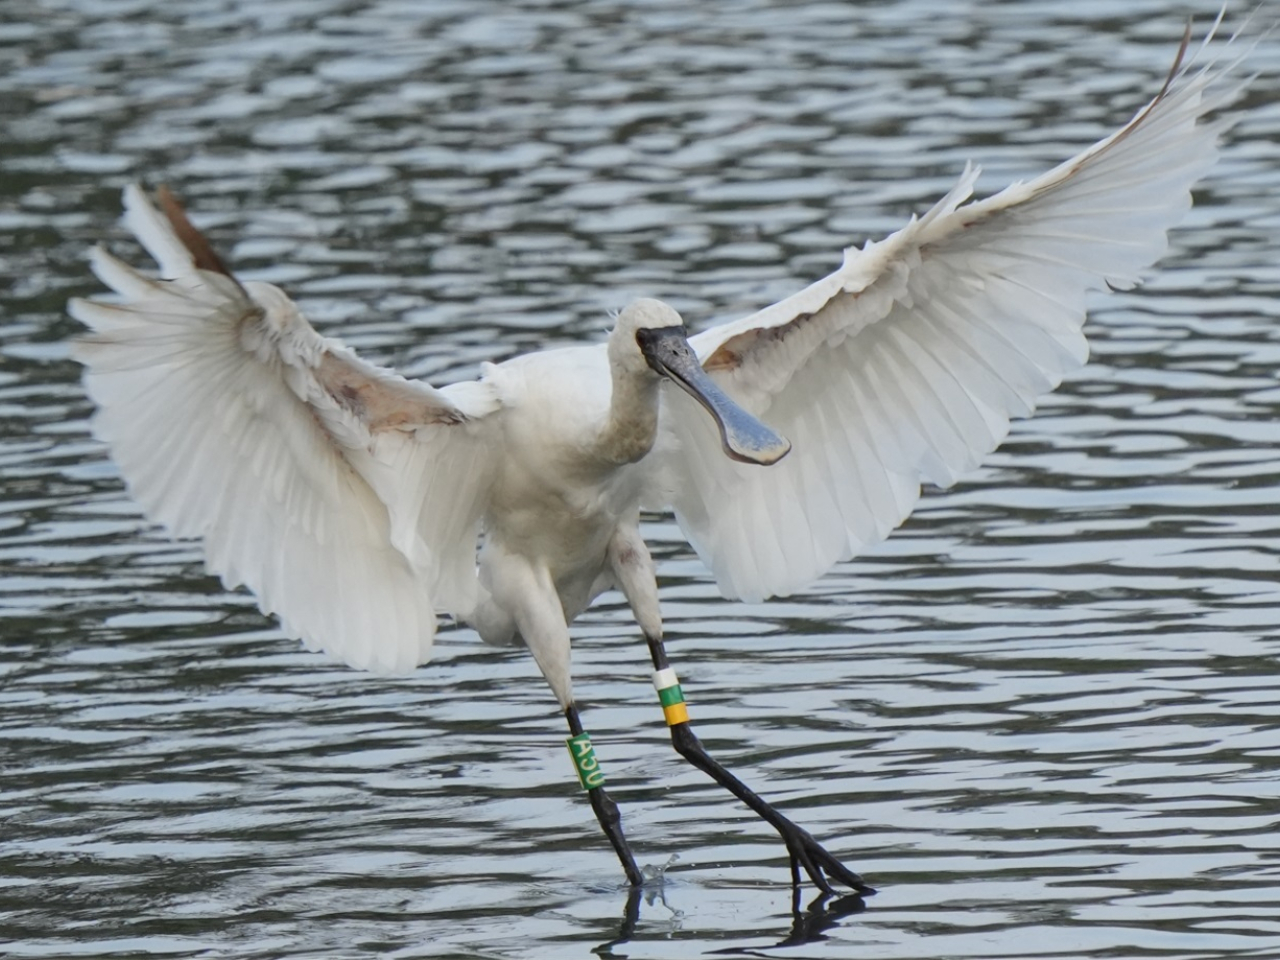 'San Tin project can hurt black-faced spoonbill site'